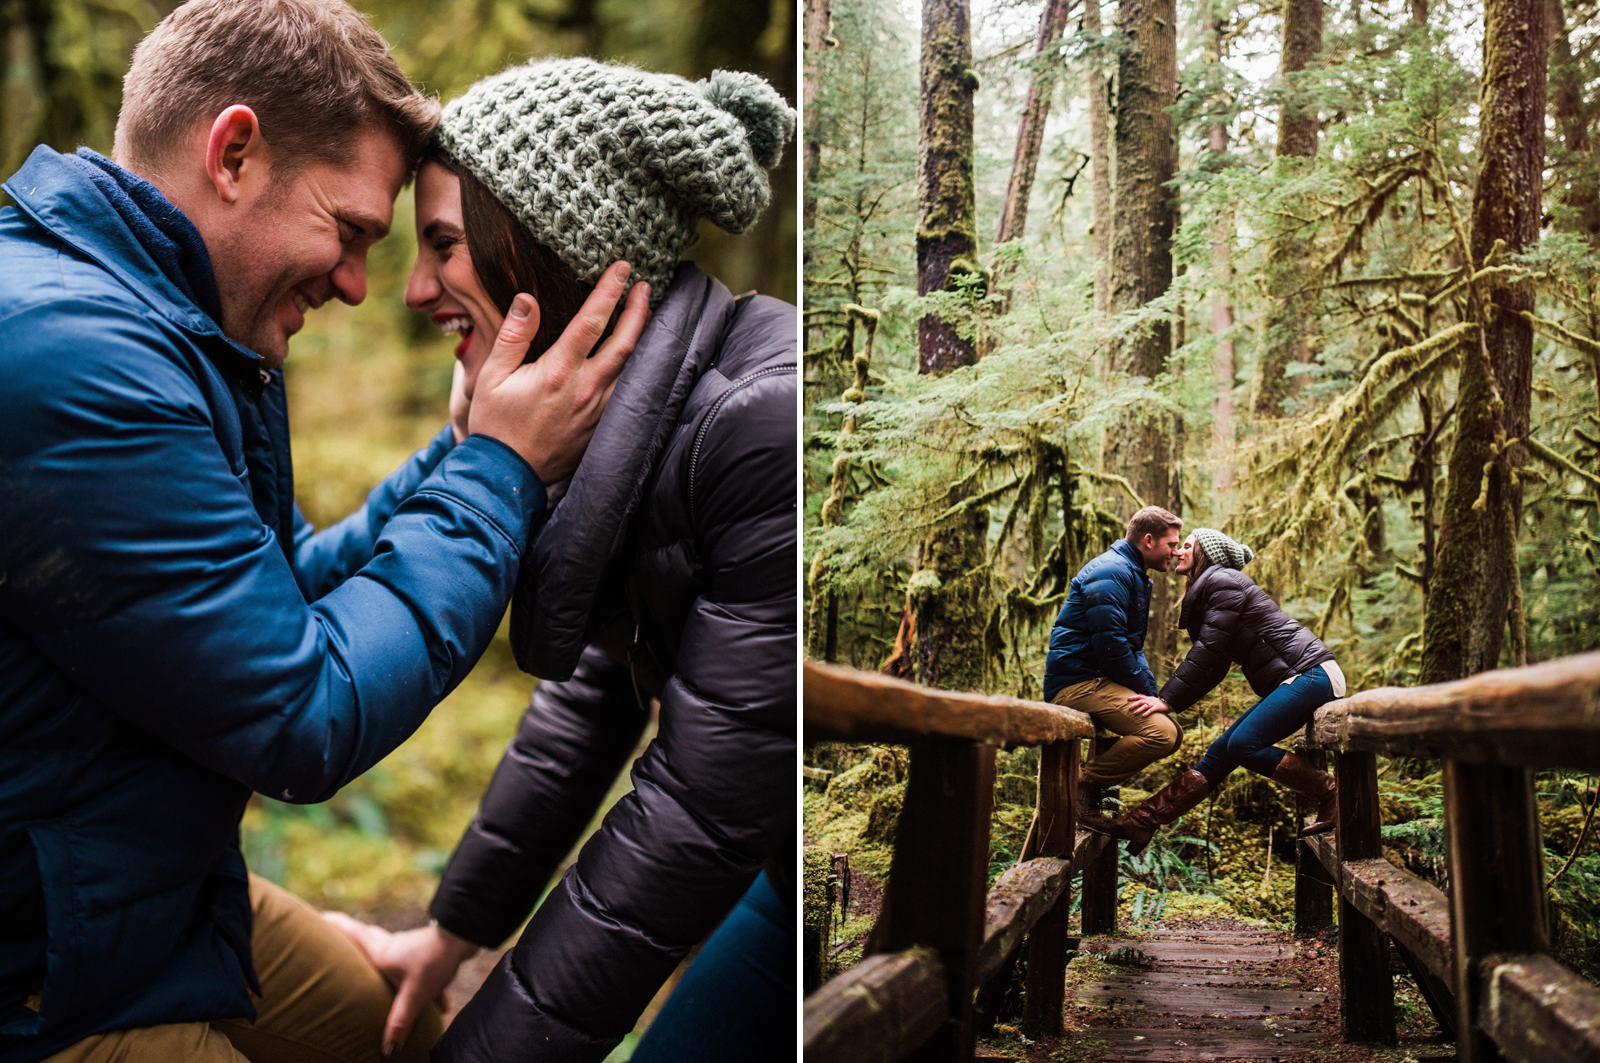 175-mossy-forest-pnw-engagement-photo-by-seattle-photographer-ryan-flynn.jpg